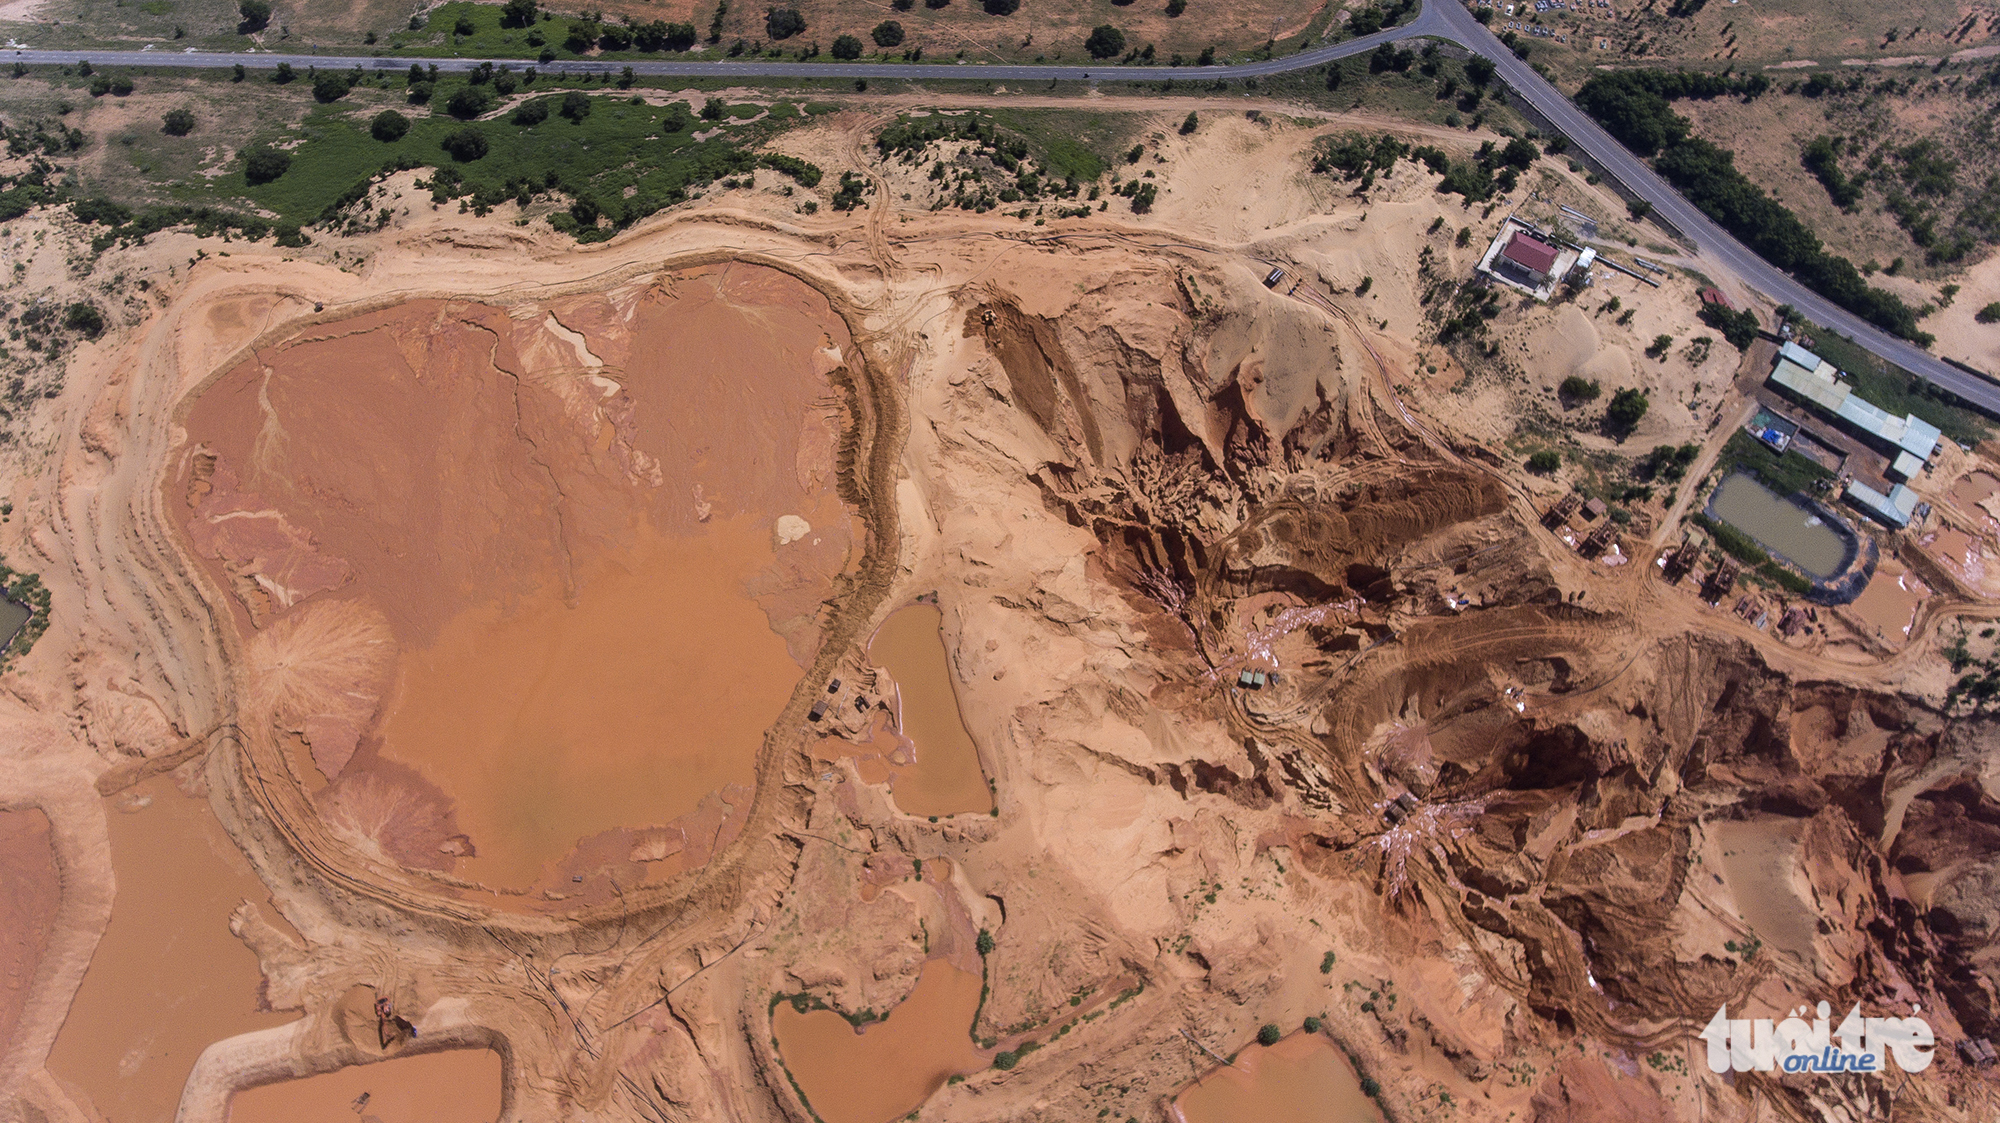 ‘Ugly’ mine craters impacting tourism in south-central Vietnamese province